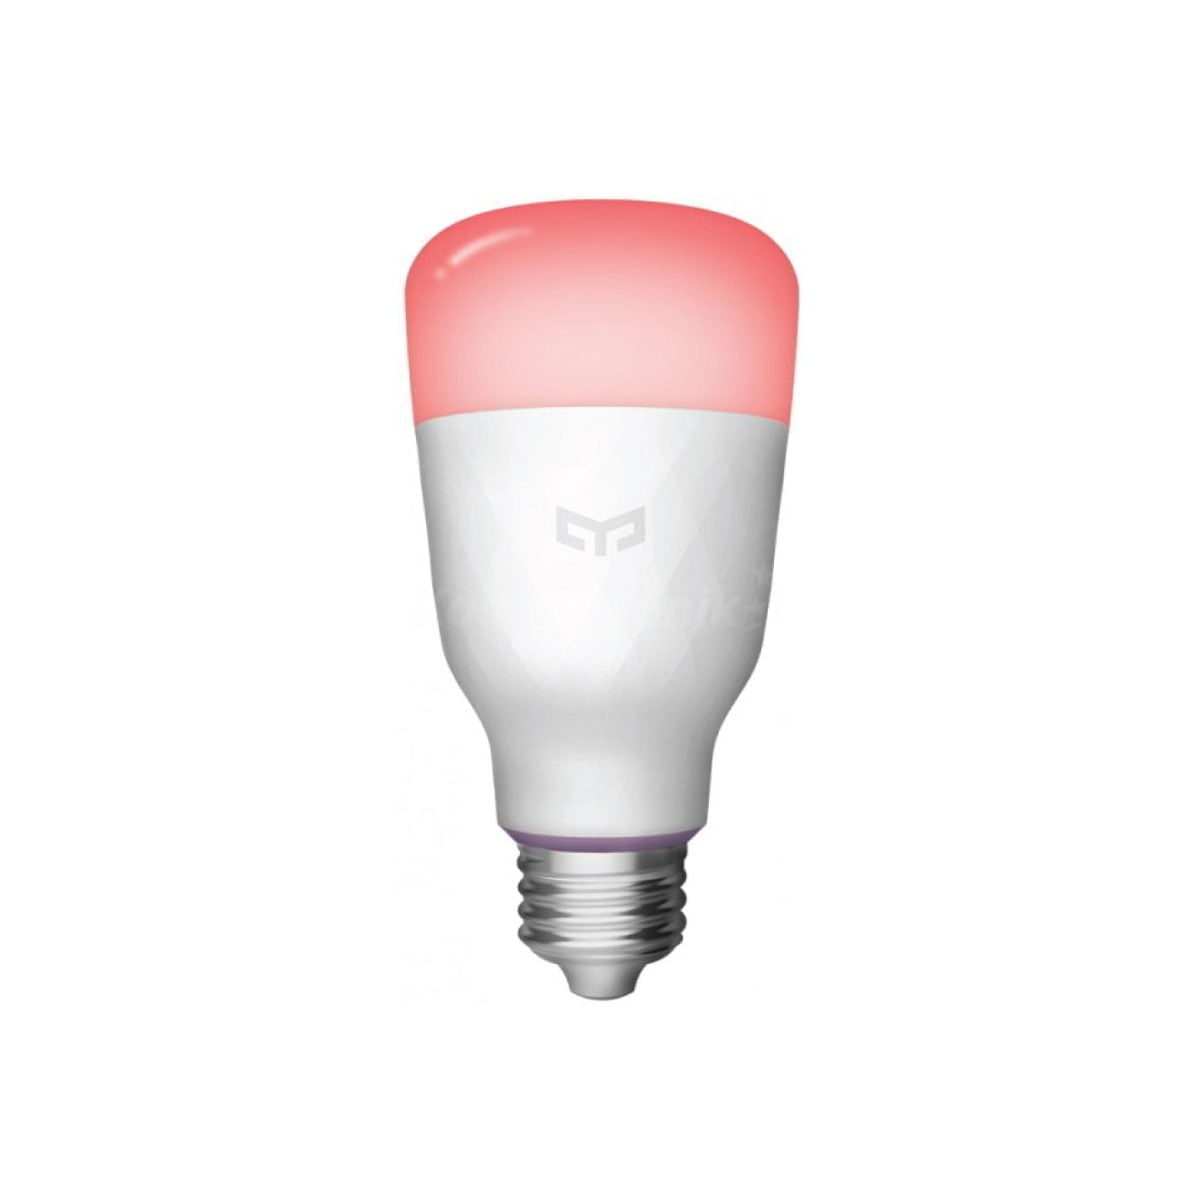 Yldp13Yl 4 1 Xiaomi The Yeelight 1S Rgb Smart Light Bulb Will Allow You To Create Your Own Smart Home. You Can Control It With Your Voice Or Application And Decide With What Temperature And Power It Should Shine. Luminous Flux: 800Lm Color Temperature: 1700K-6500K Lamp Holder: E27 Rated Power: 8.5W &Nbsp; 16 Million Colors Wifi Enabled, Voice Control, App Control, Music Sync &Lt;Img Class=&Quot;Alignnone Wp-Image-8061 Size-Full&Quot; Src=&Quot;Https://Lablaab.com/Wp-Content/Uploads/2020/04/Bulb-27-2-Scaled.jpg&Quot; Alt=&Quot;&Quot; Width=&Quot;2560&Quot; Height=&Quot;357&Quot; /&Gt; &Nbsp; Yeelight Smart Bulb 1S (Color)